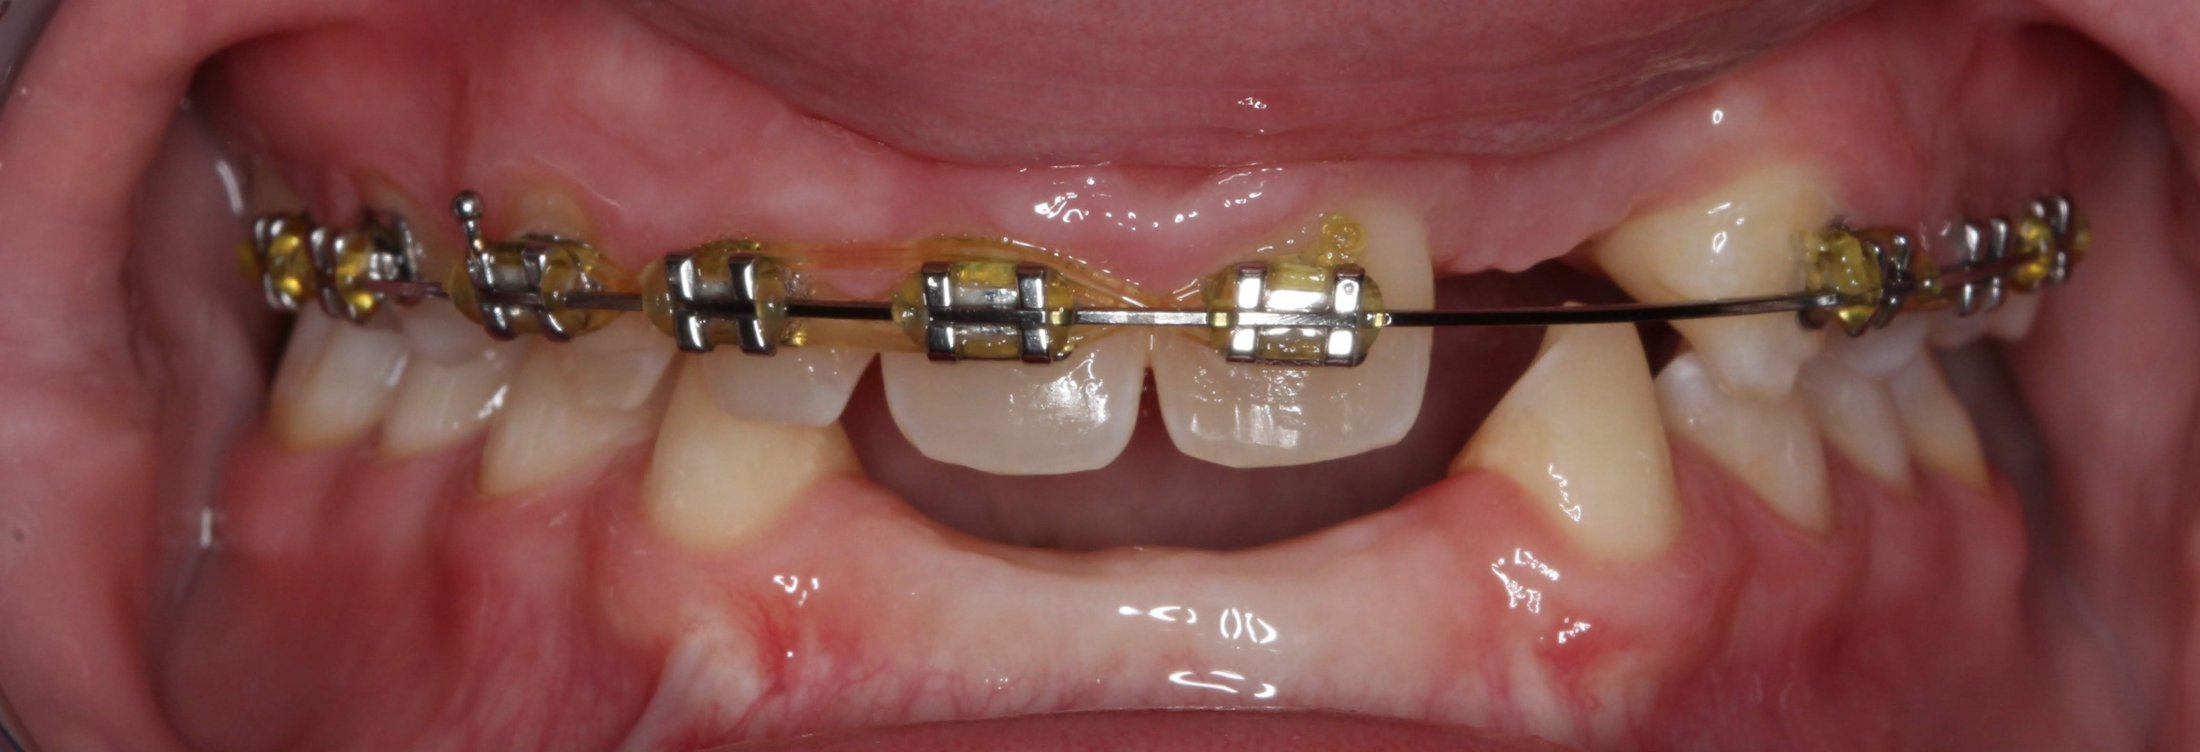 Patient's mouth before implants with braces